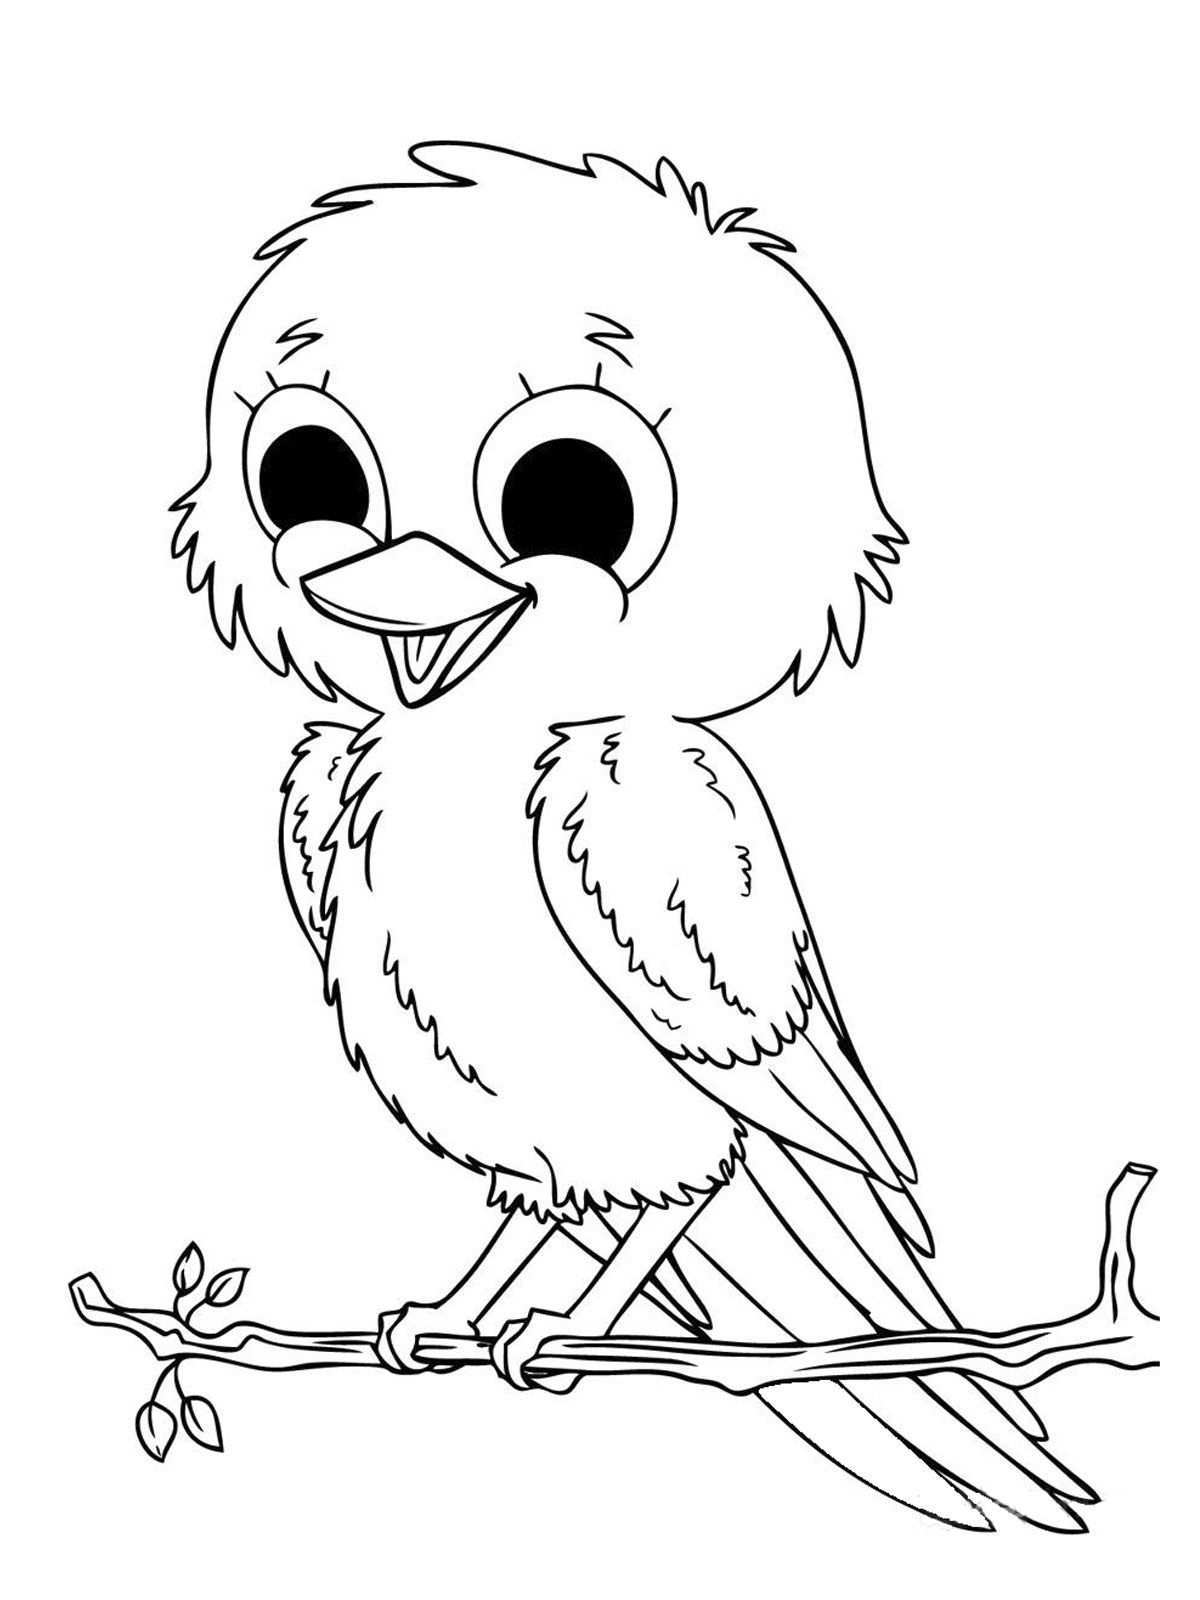 Baby Animal Coloring Pages Bird Coloring Pages Cute Coloring Pages Animal Coloring Pa